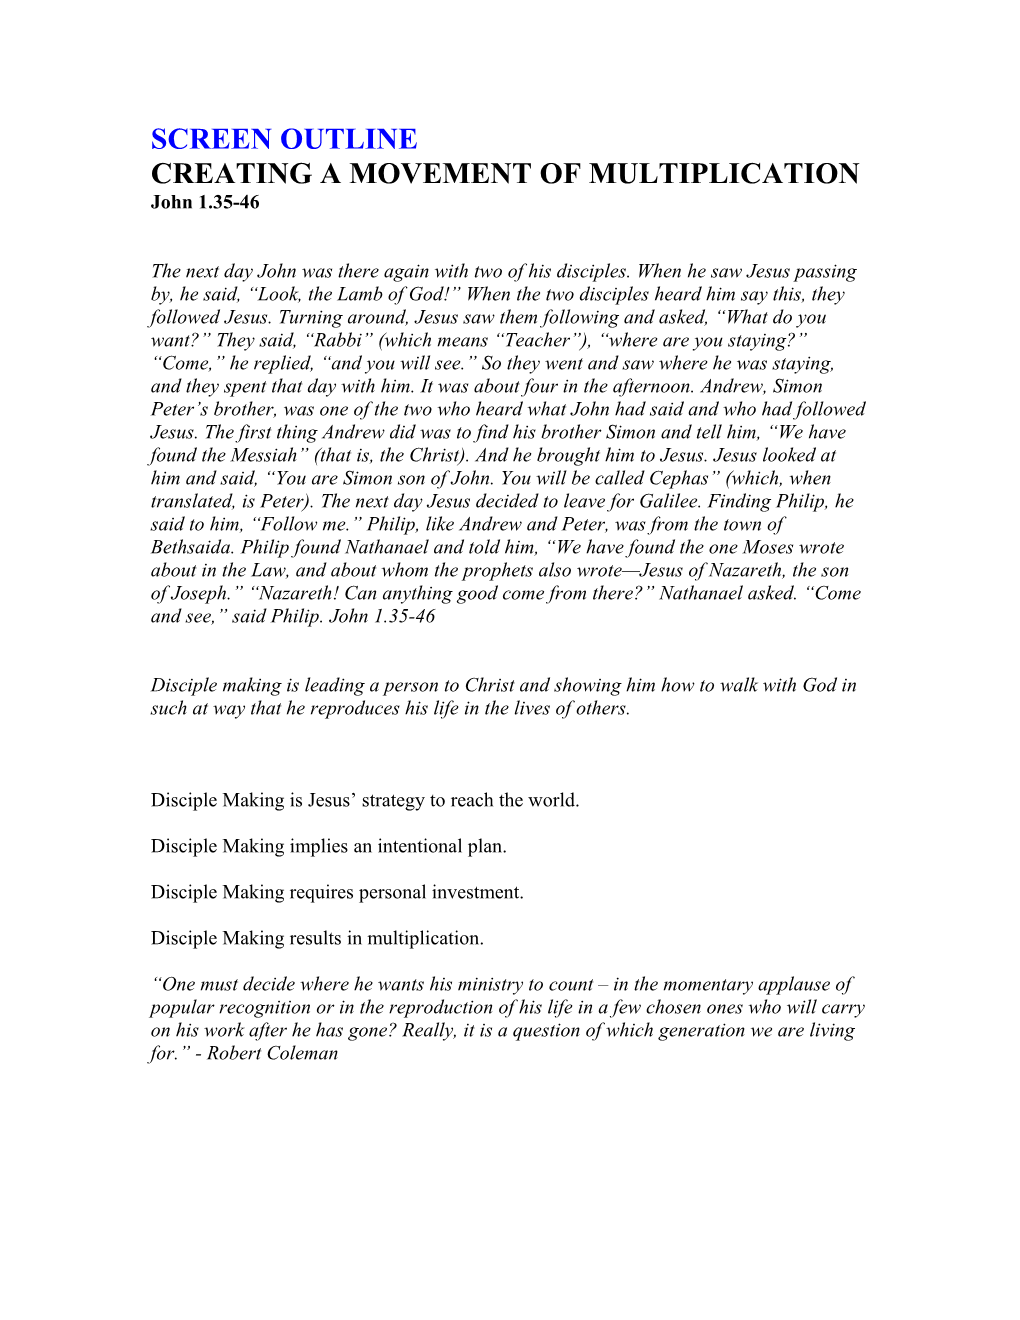 Creating a Movement of Multiplication